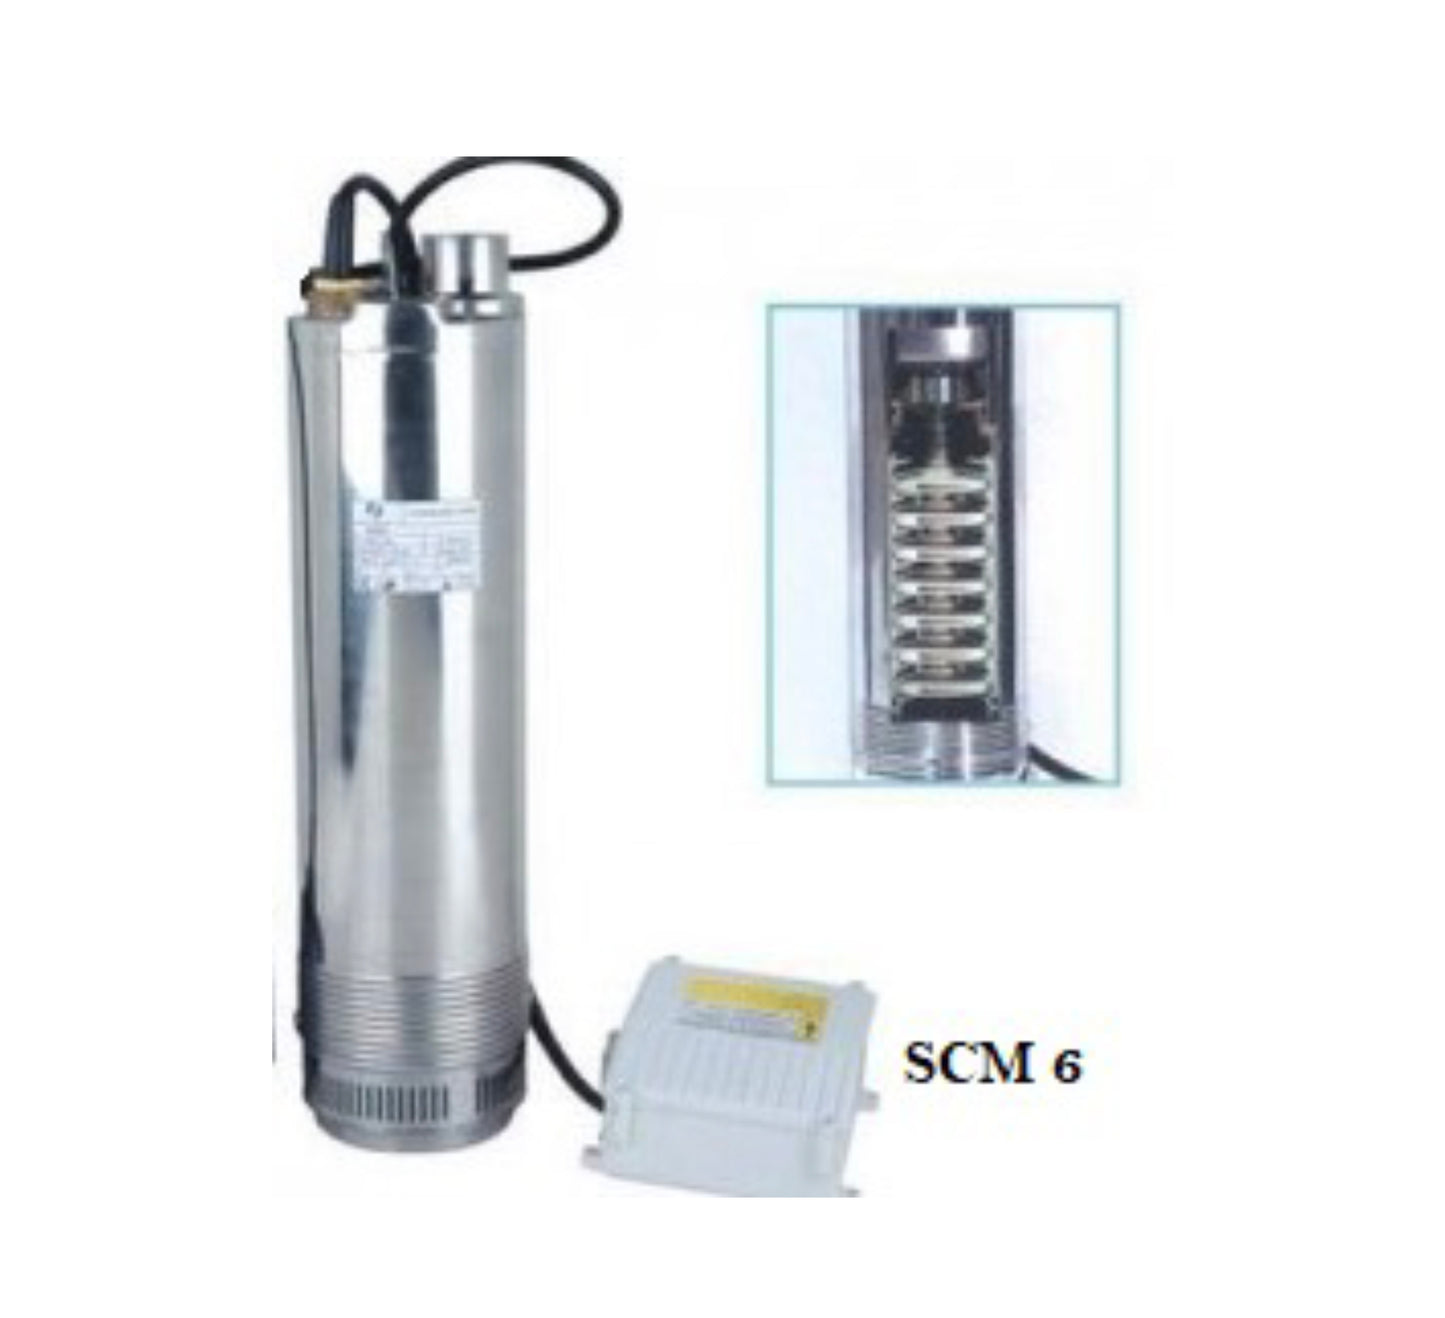 SPCO MULTISTAGE SUBMERSIBLE PUMP SCM 6 (WITHOUT FLOAT SWITCH) 1.1KW, 1X240VX50HZ